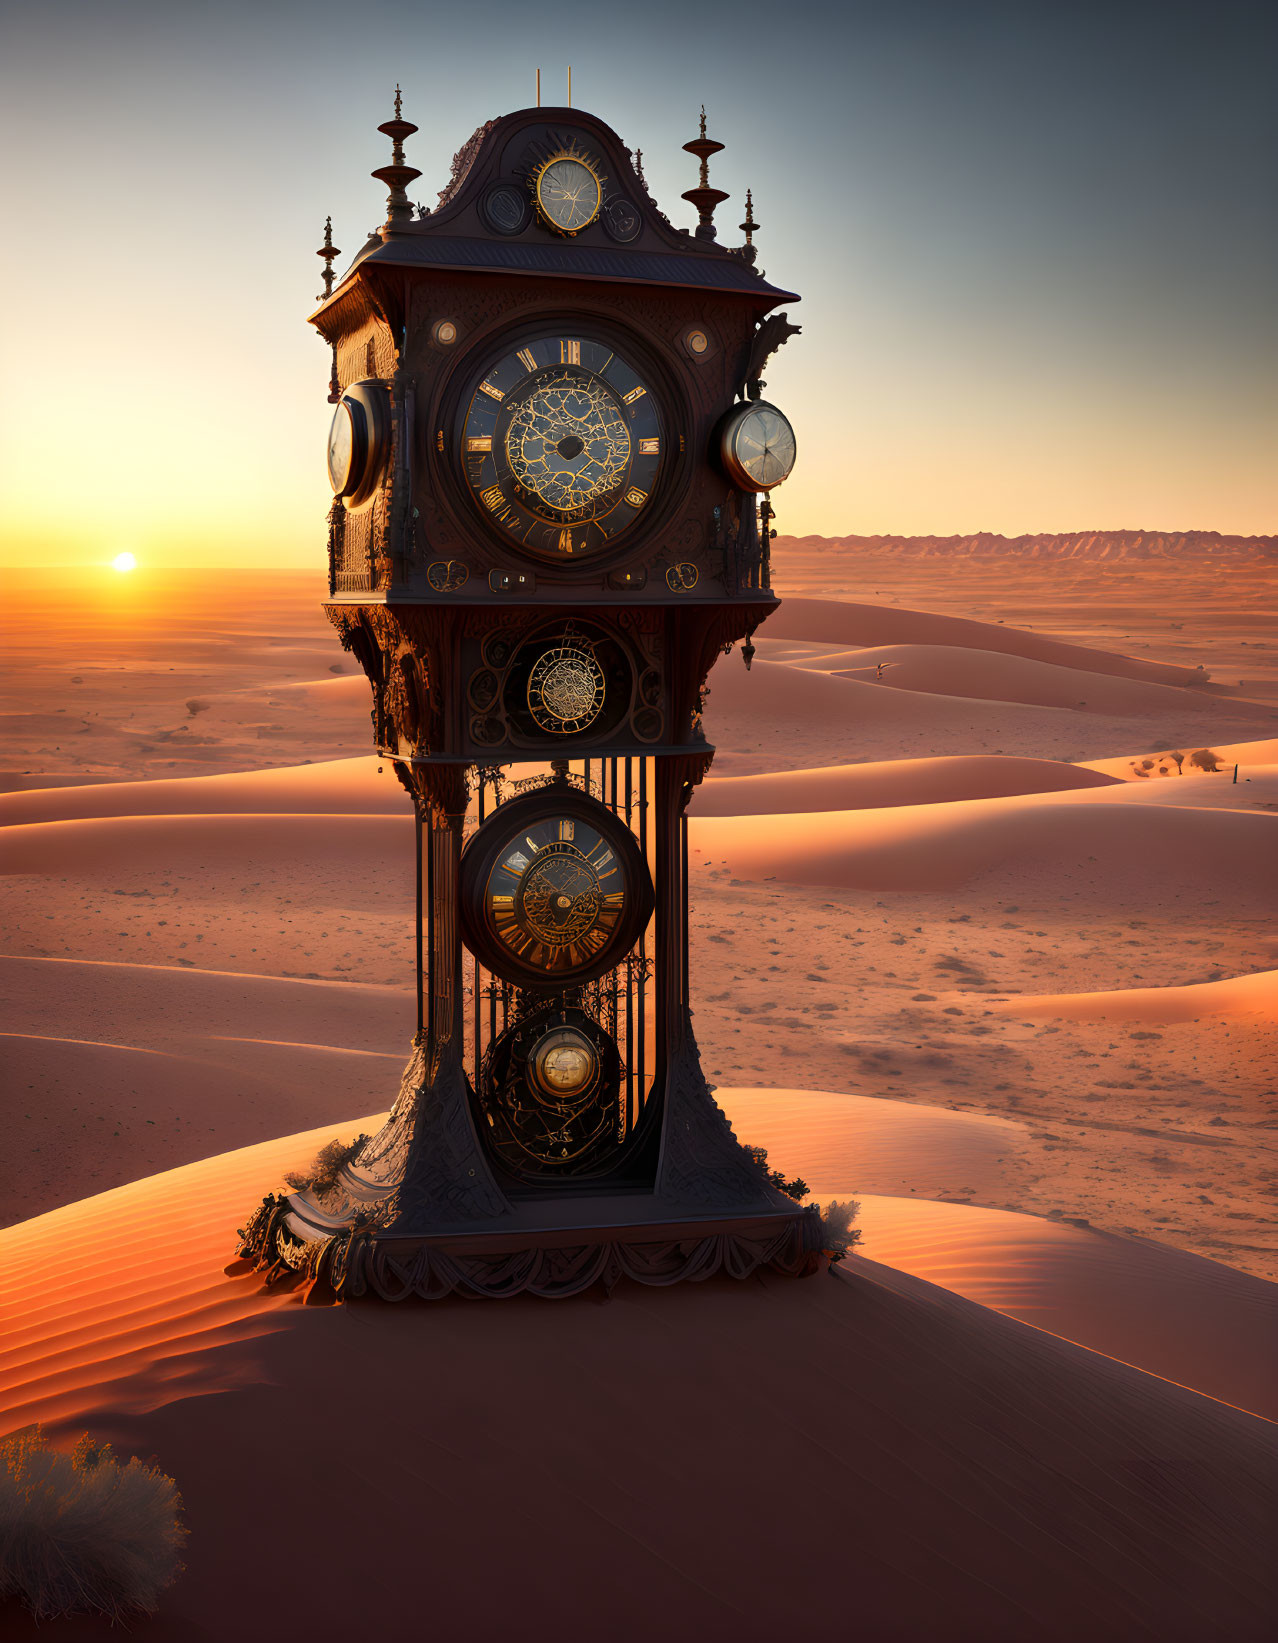 Elaborate clock tower in sand dunes at sunset